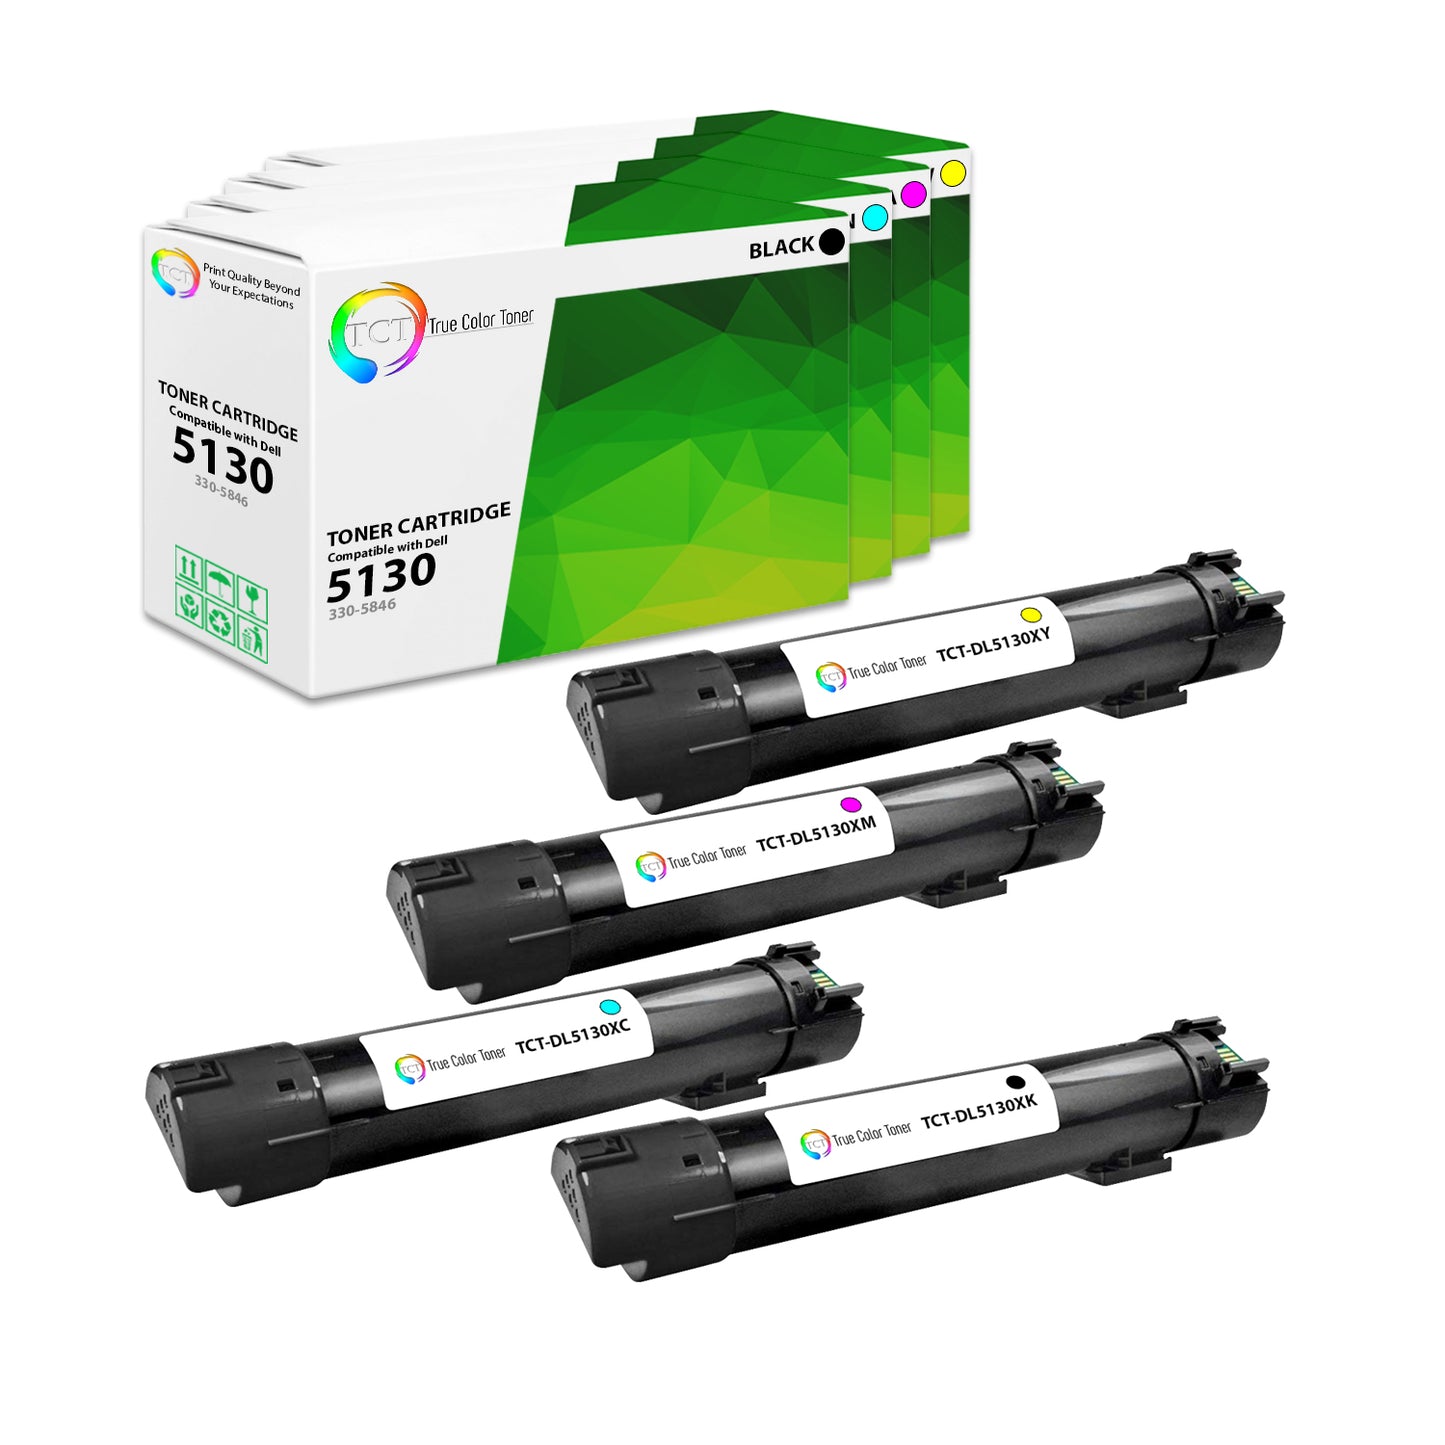 TCT Compatible HY Toner Cartridge Replacement for the Dell 5130 Series - 4 Pack (BK, C, M, Y)